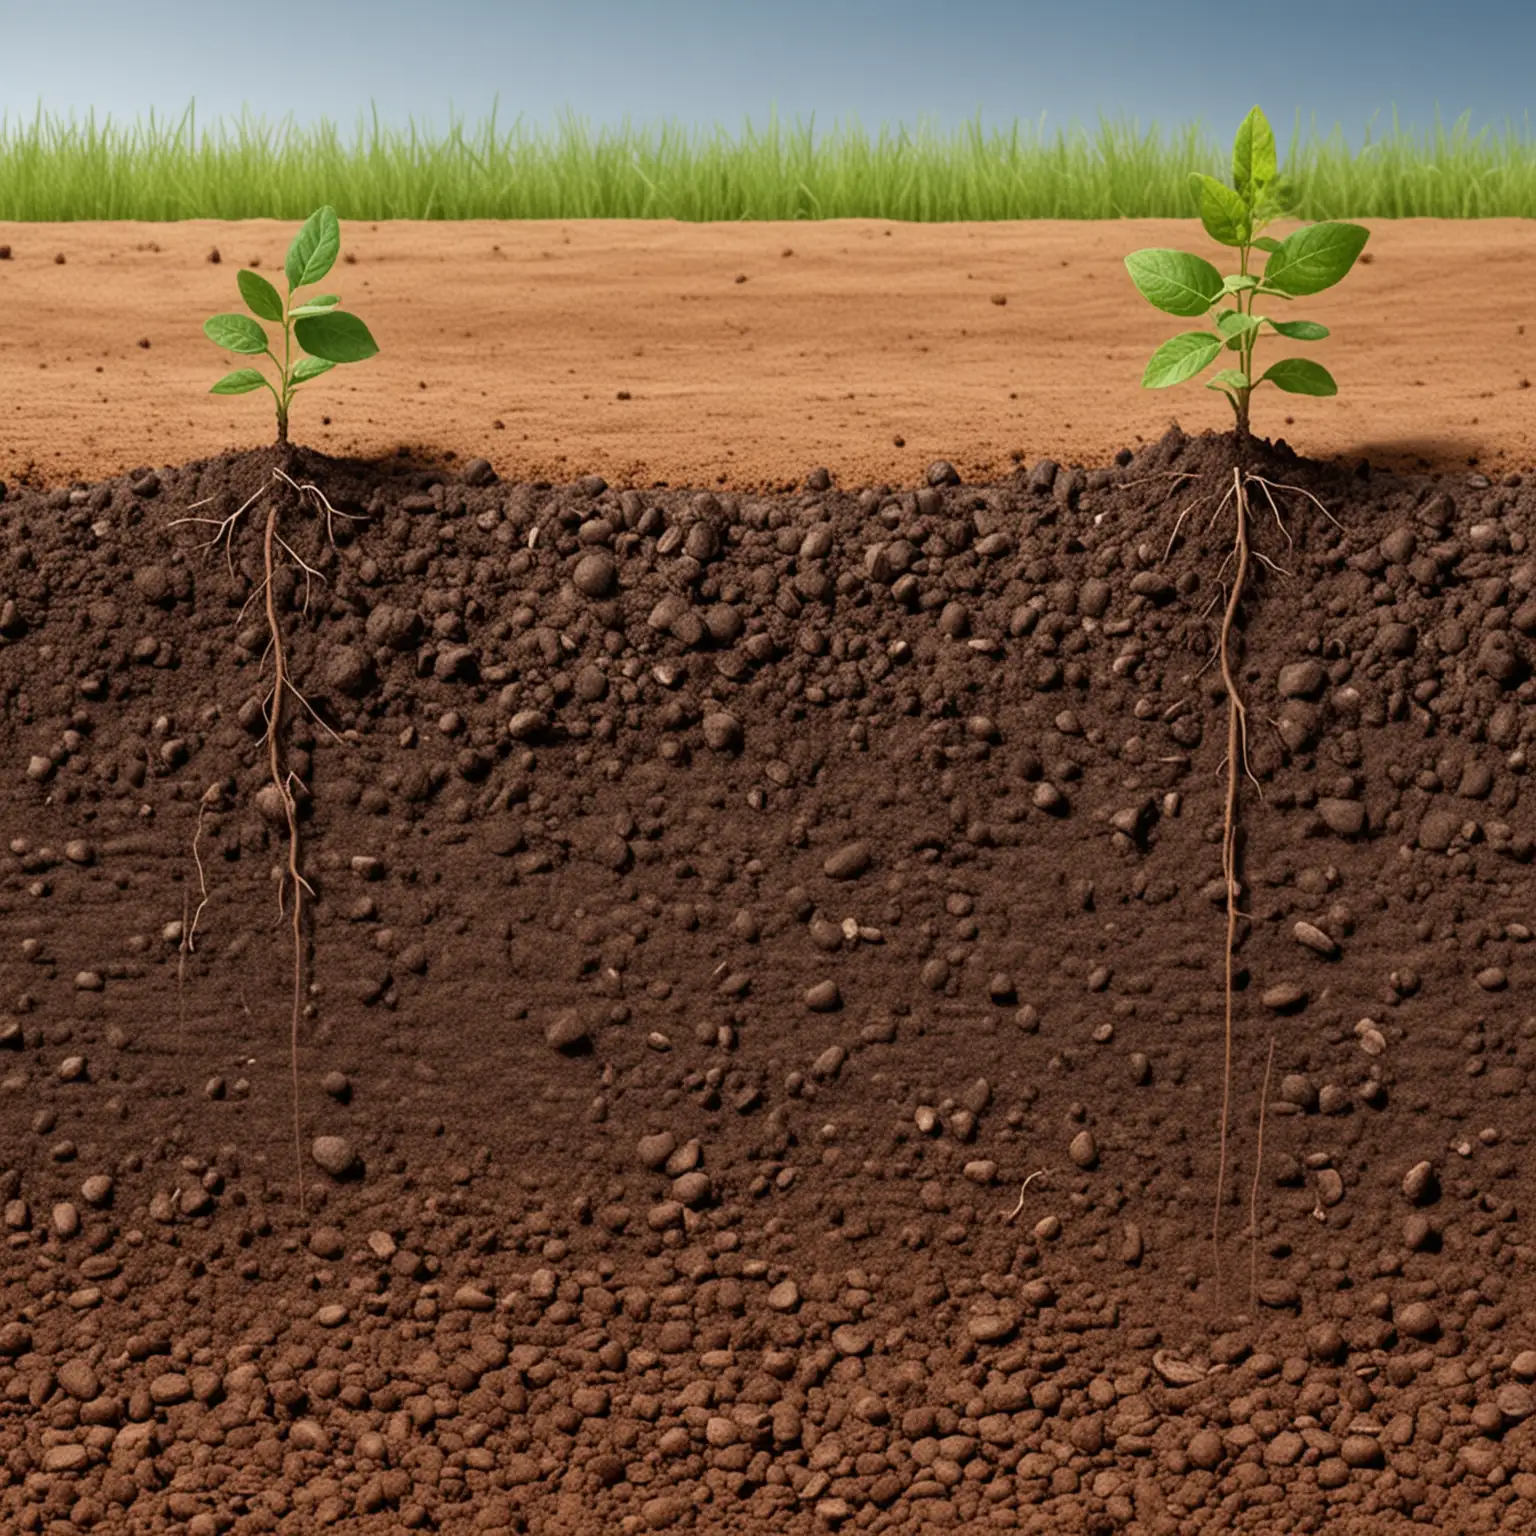 show the process of carbon fixation in soil in an illustration